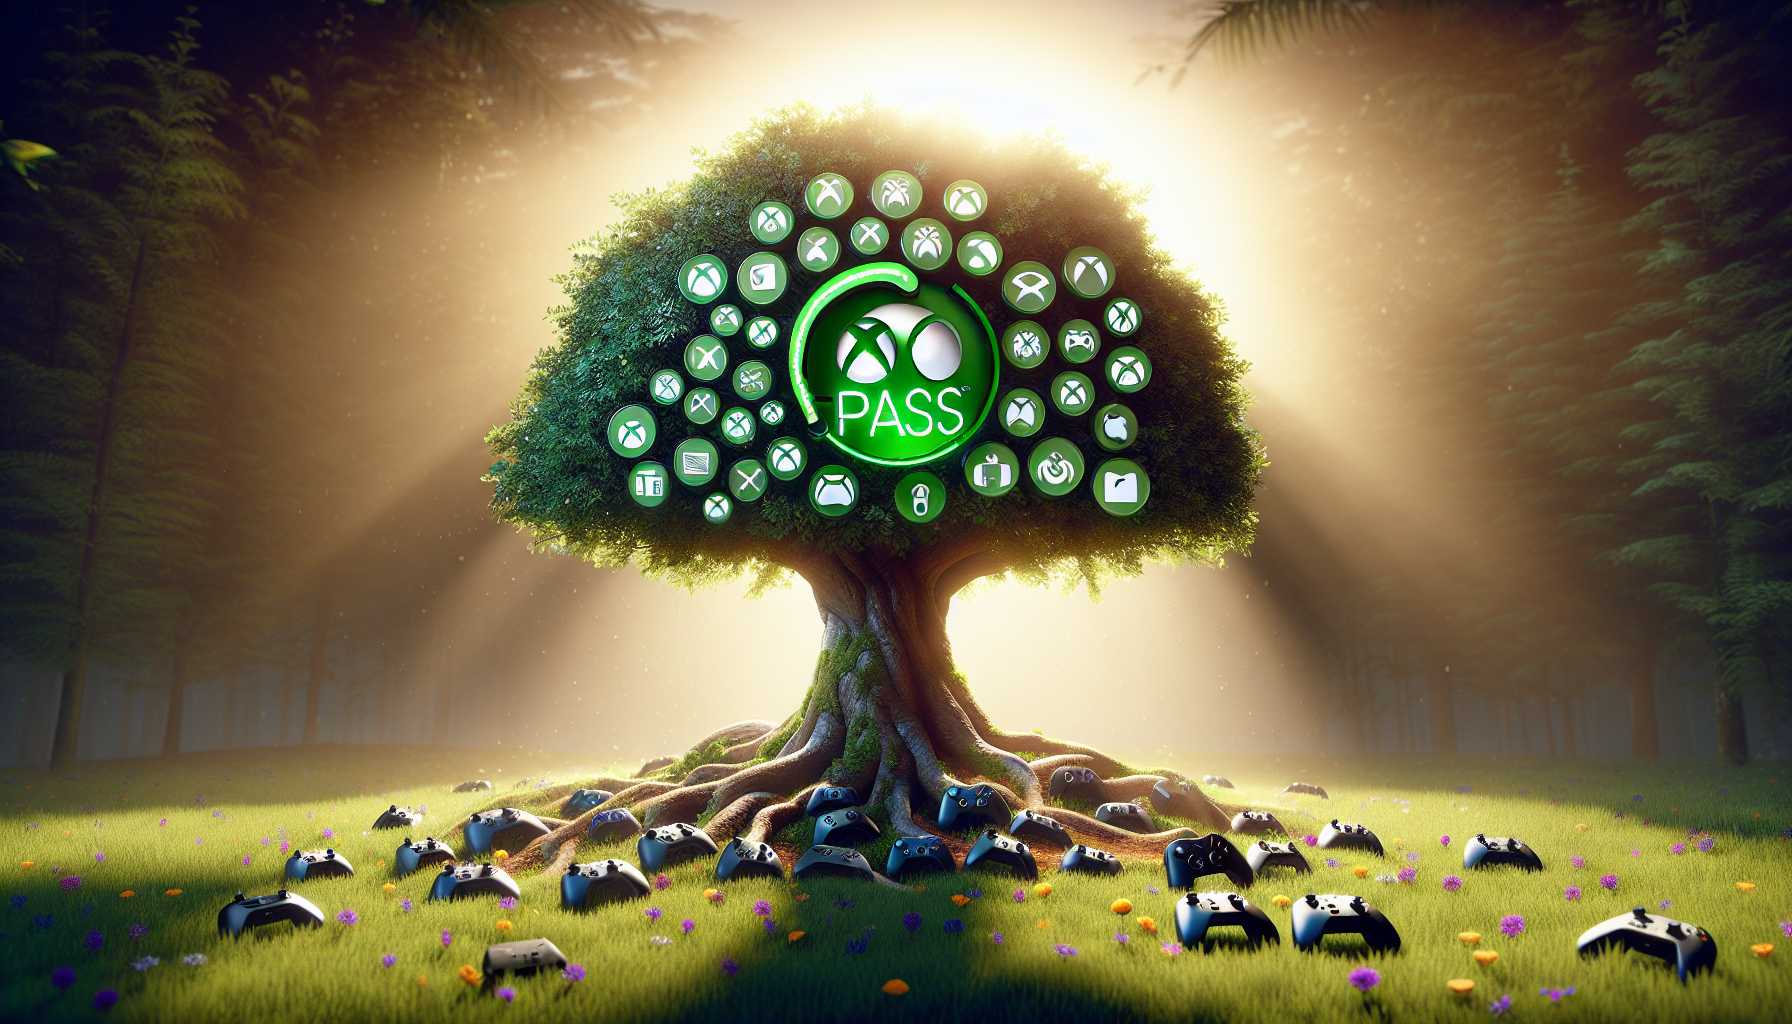 Microsoft Game Pass service visualized as a growing tree